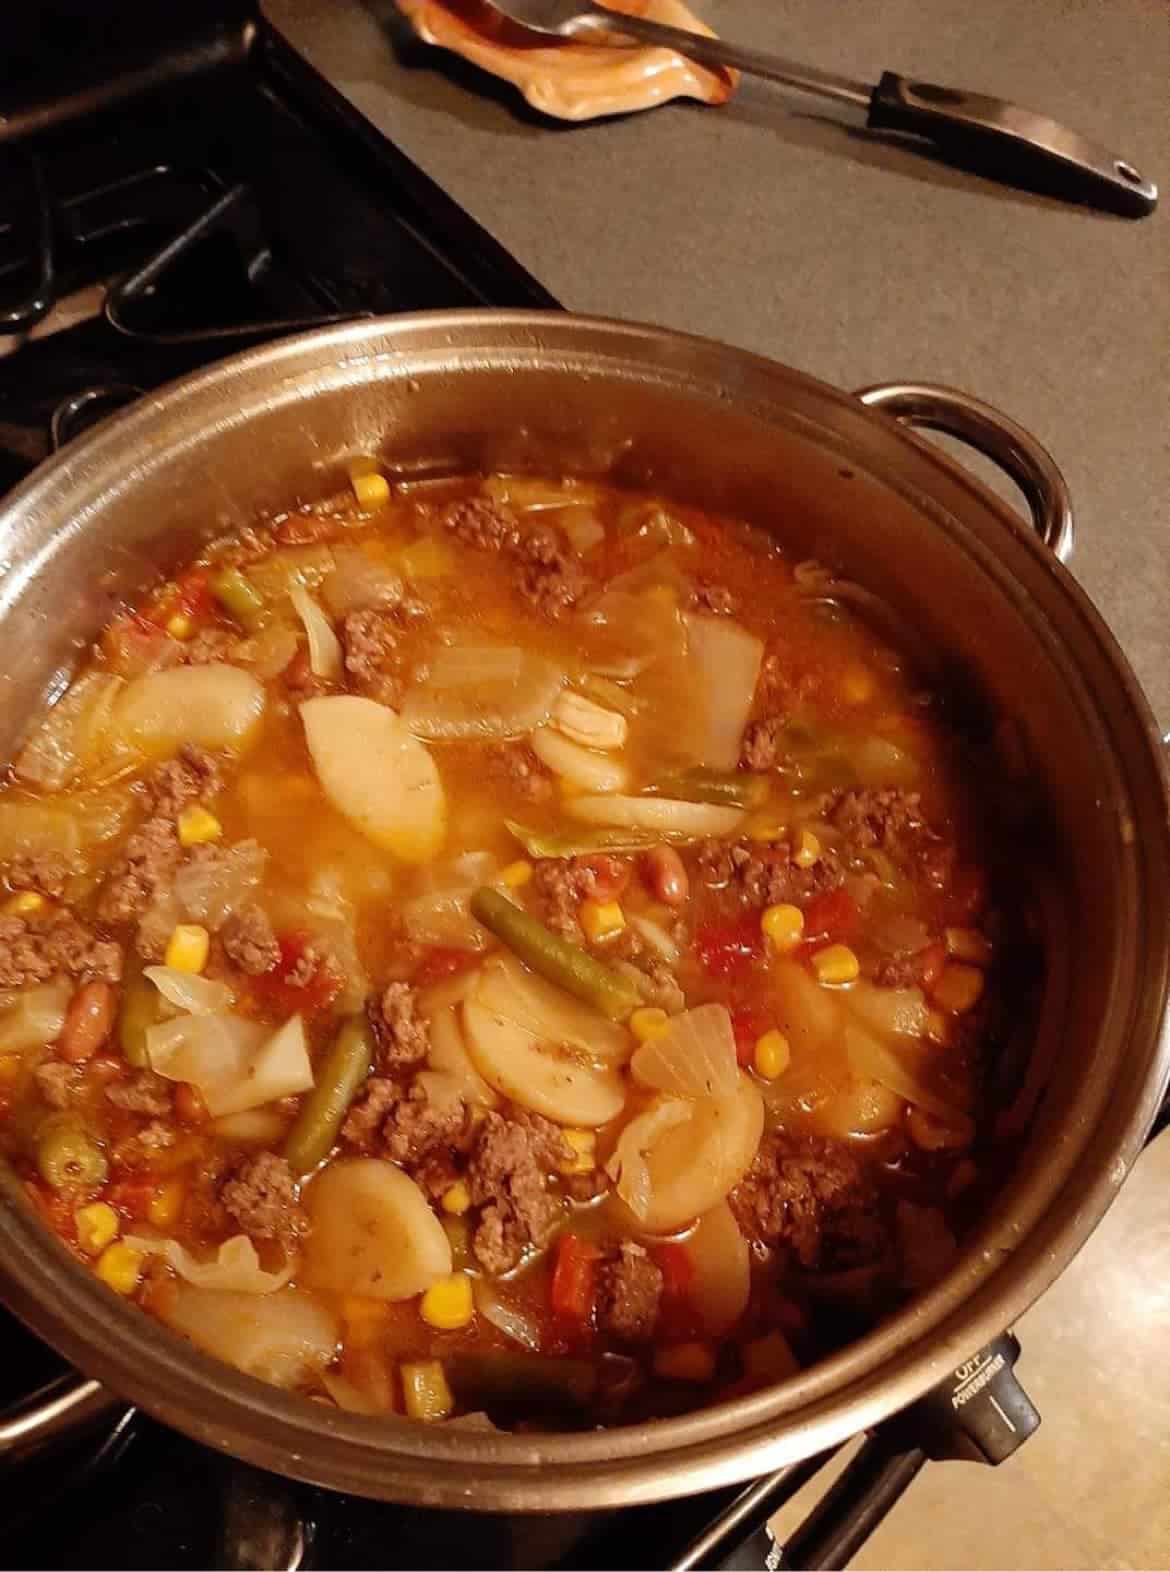 Found a recipe “Canned Cowboy Stew” it’s good!!